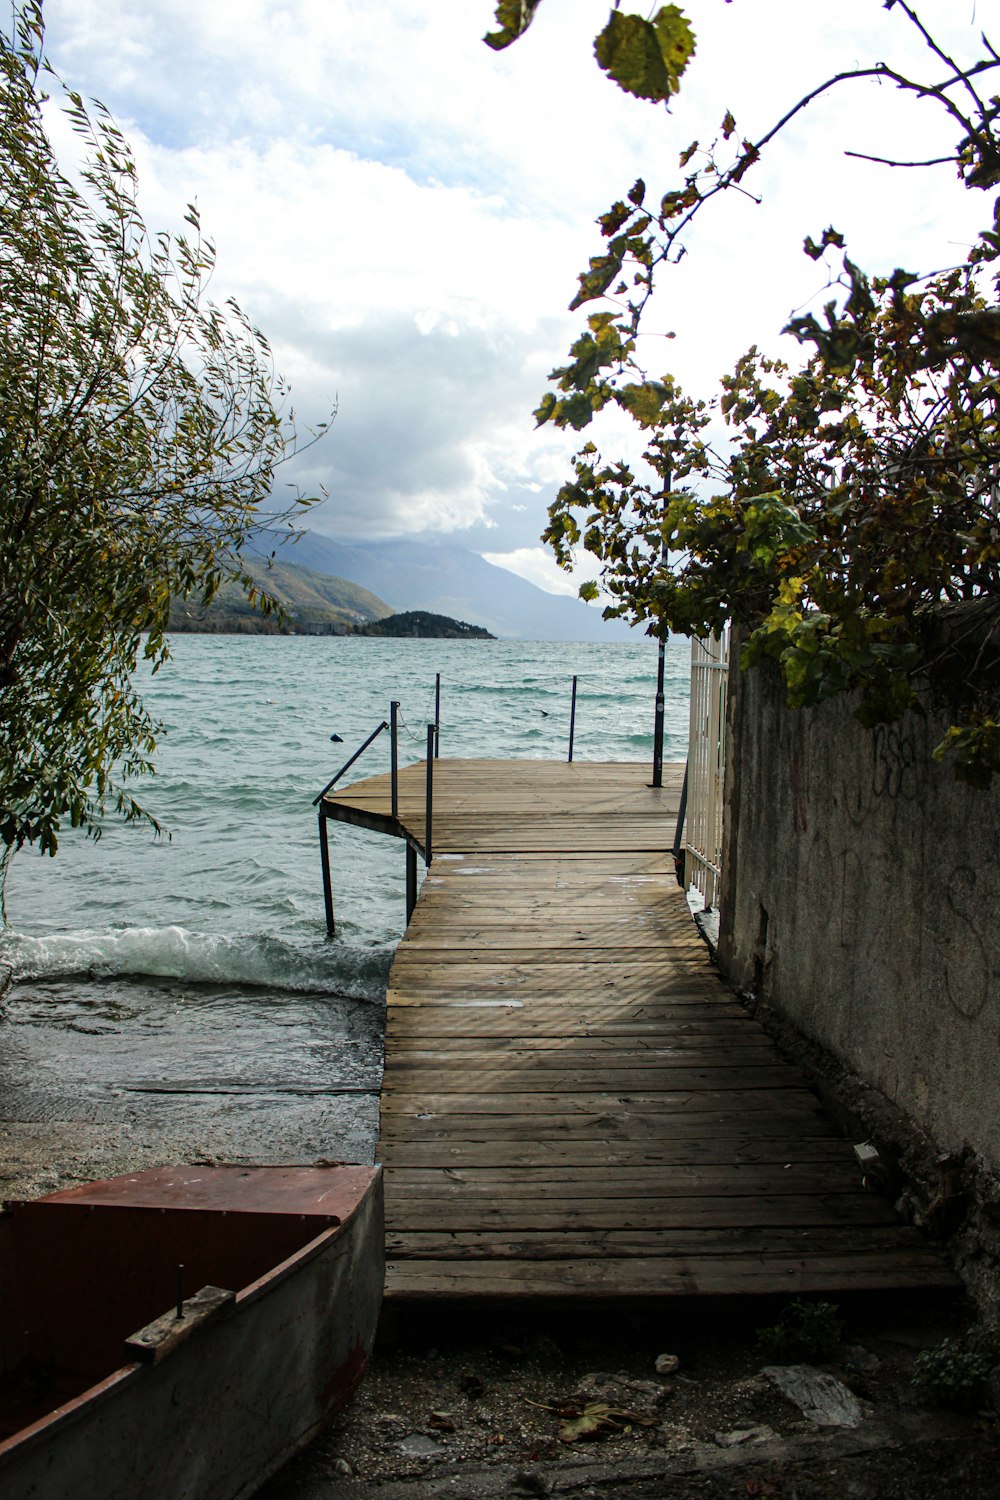 a wooden dock leading to a body of water